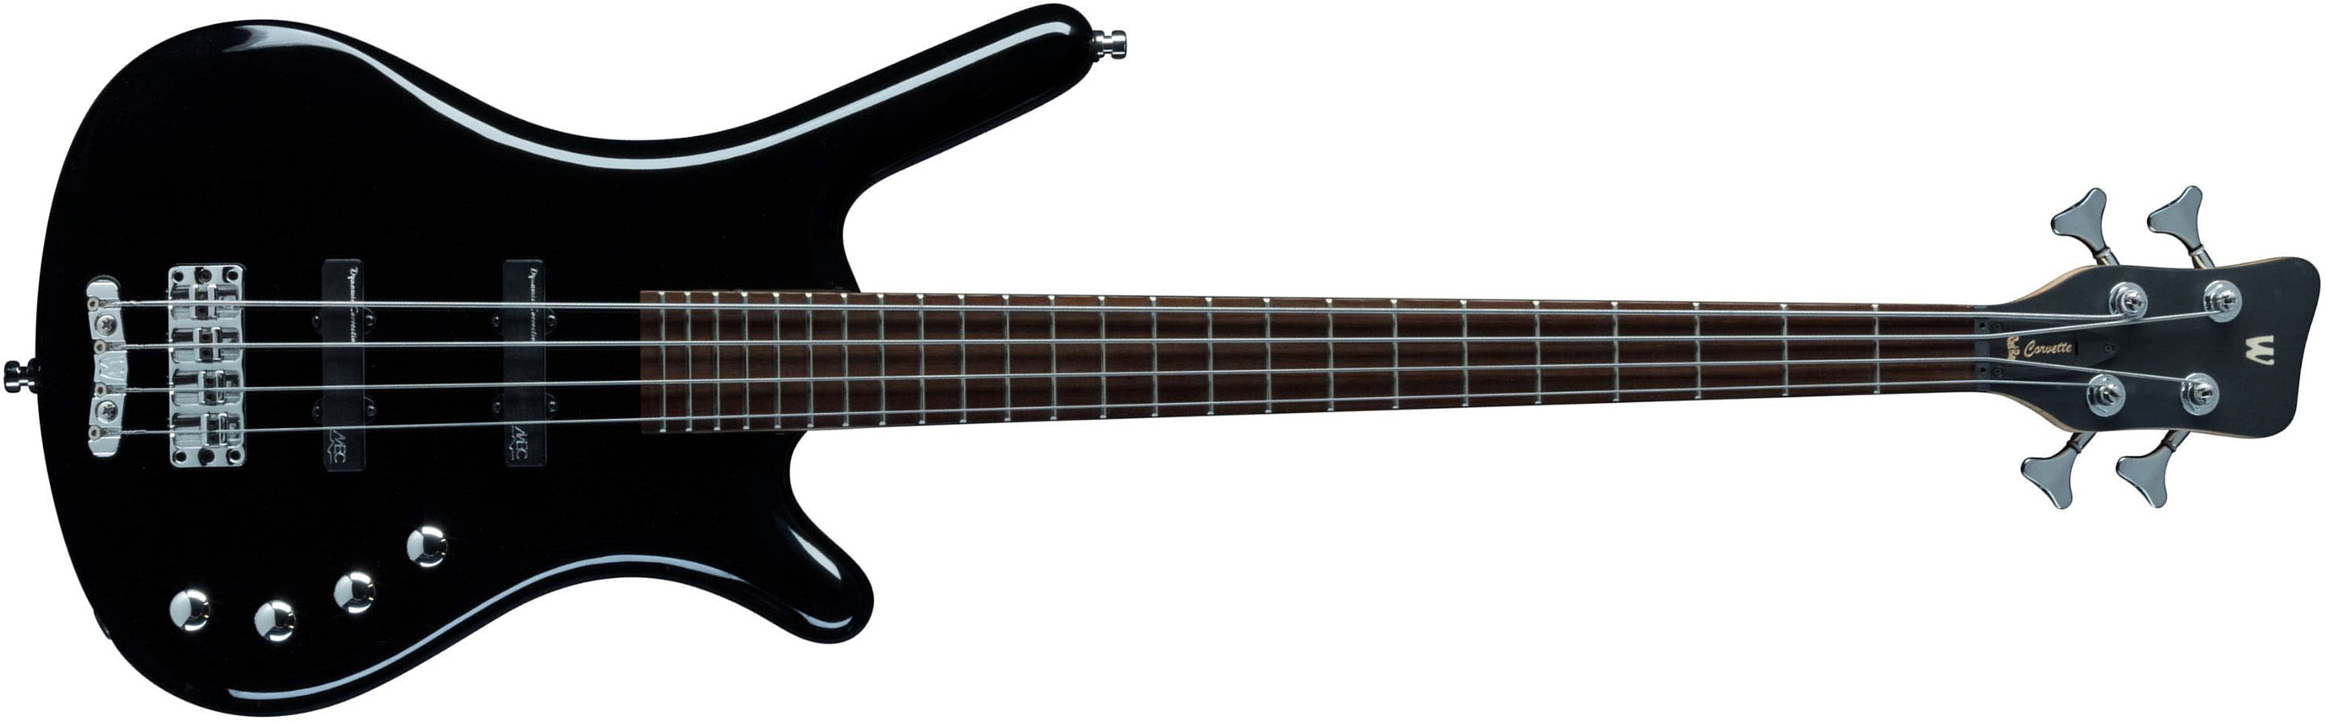 Warwick Corvette Basic 4c Rockbass Active Wen - Solid Black - Solid body electric bass - Main picture